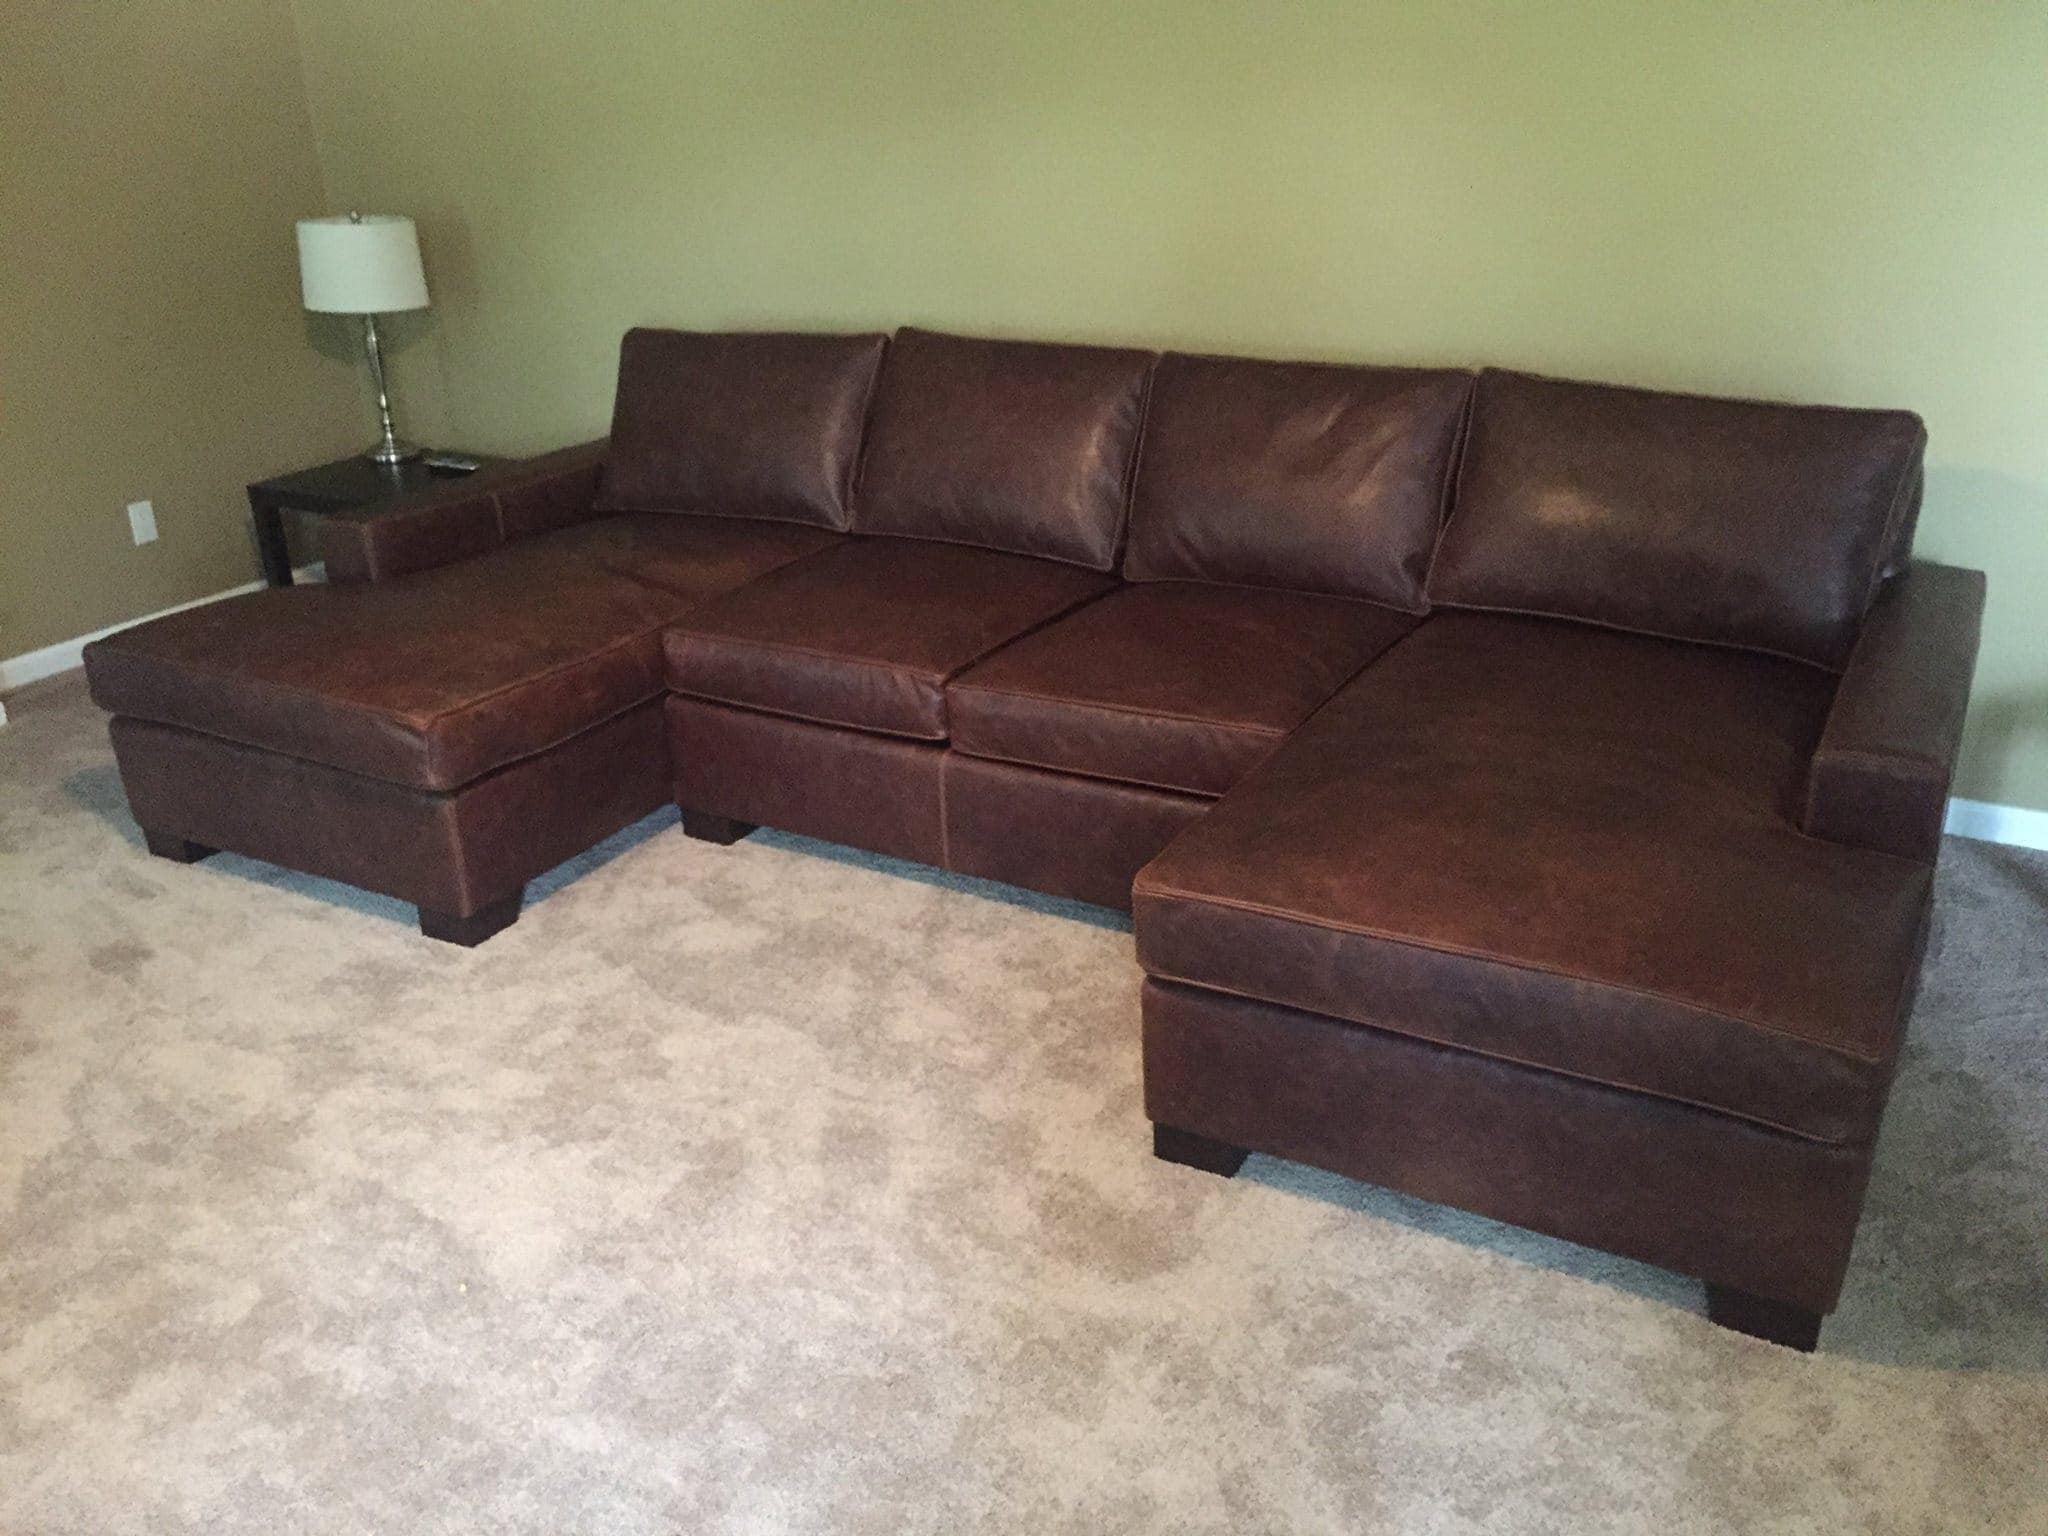 McQueen Classic Brown Leather Contemporary Square Track Arm Sectional